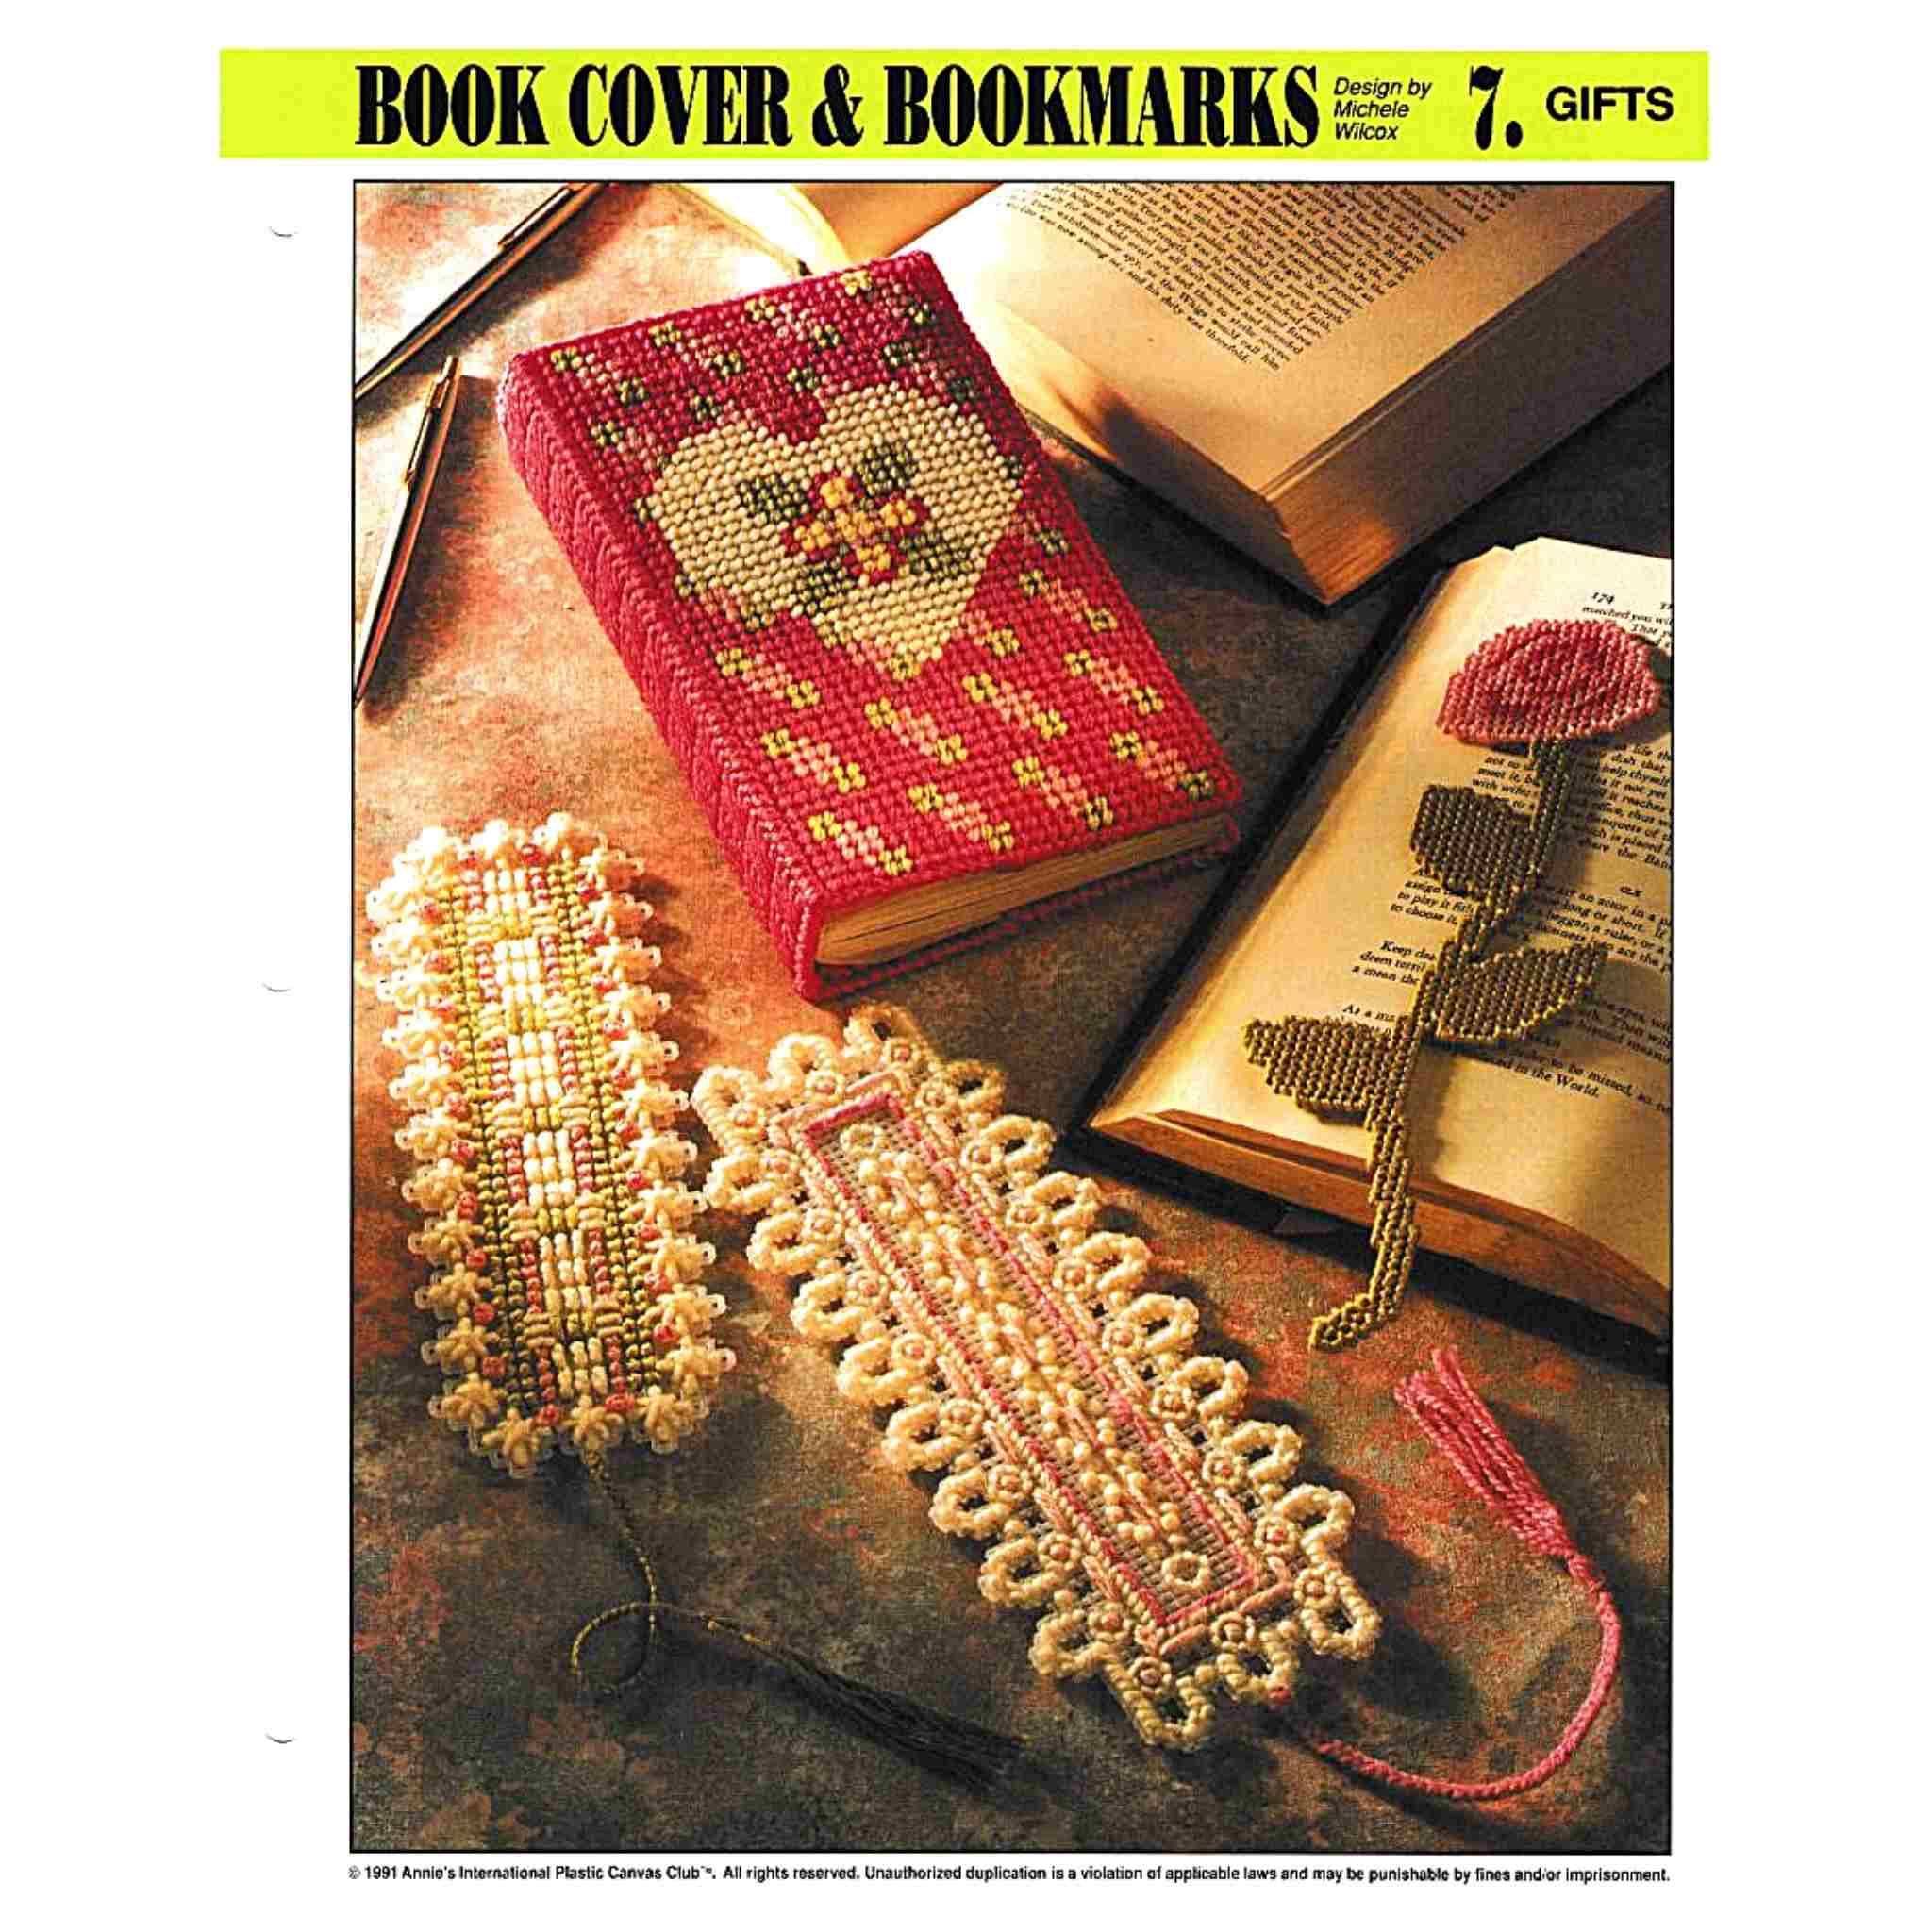 Eyelet and Rose Book Cover & Bookmarks Plastic Canvas Pattern